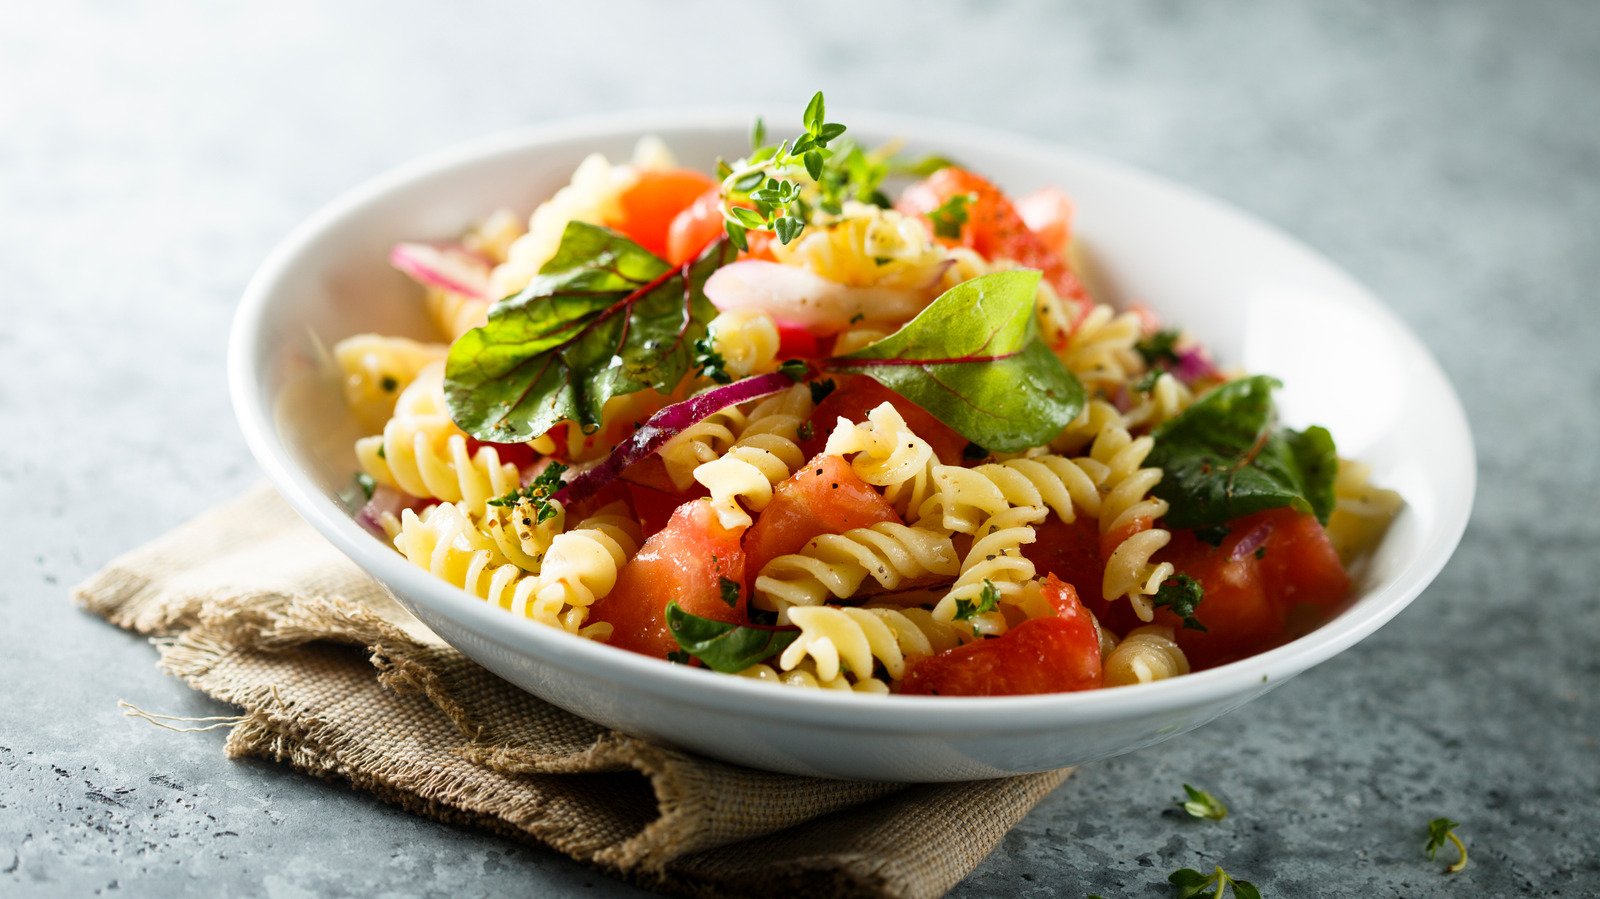 The Absolute Best Pasta To Use For Pasta Salad